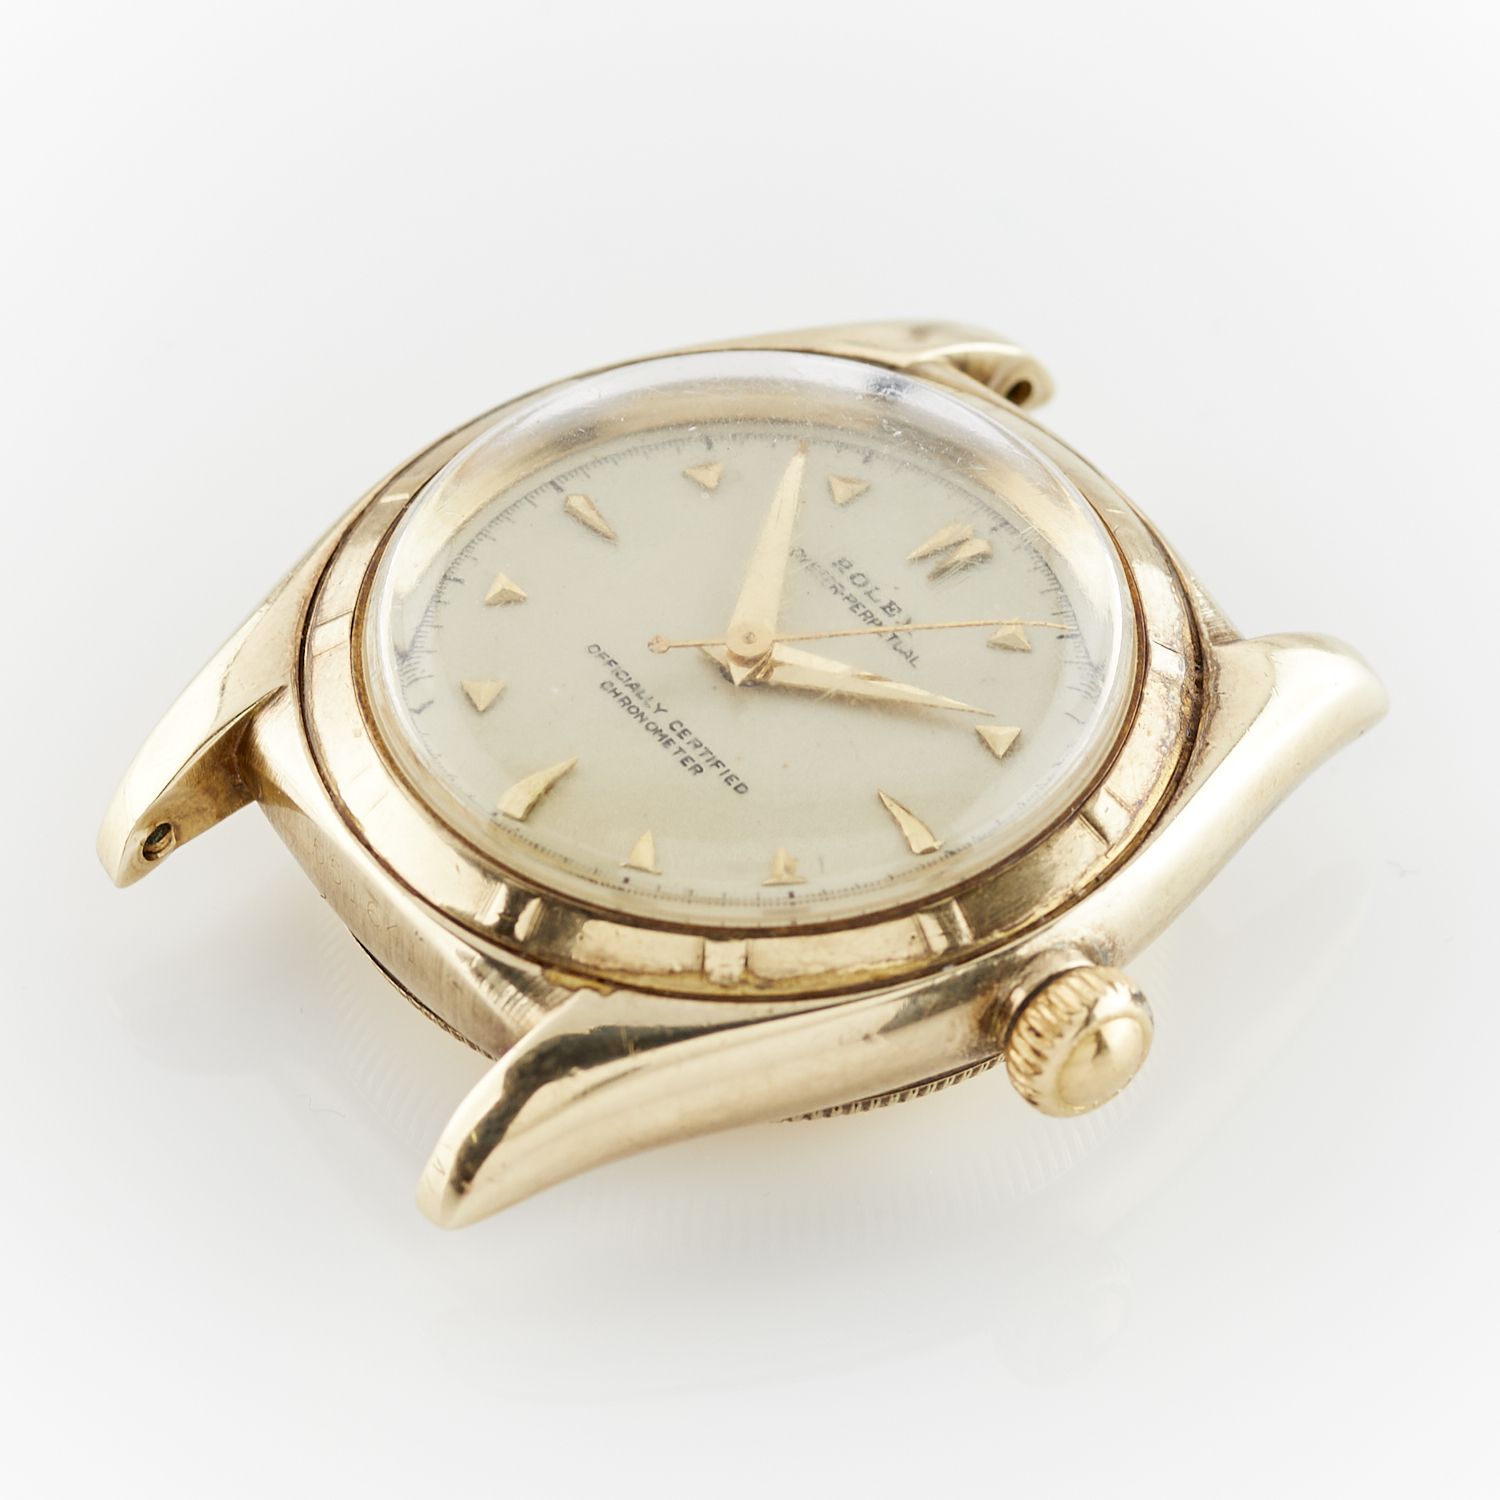 14k Rolex Oyster Perpetual 4777 Bubble Back - Image 6 of 14